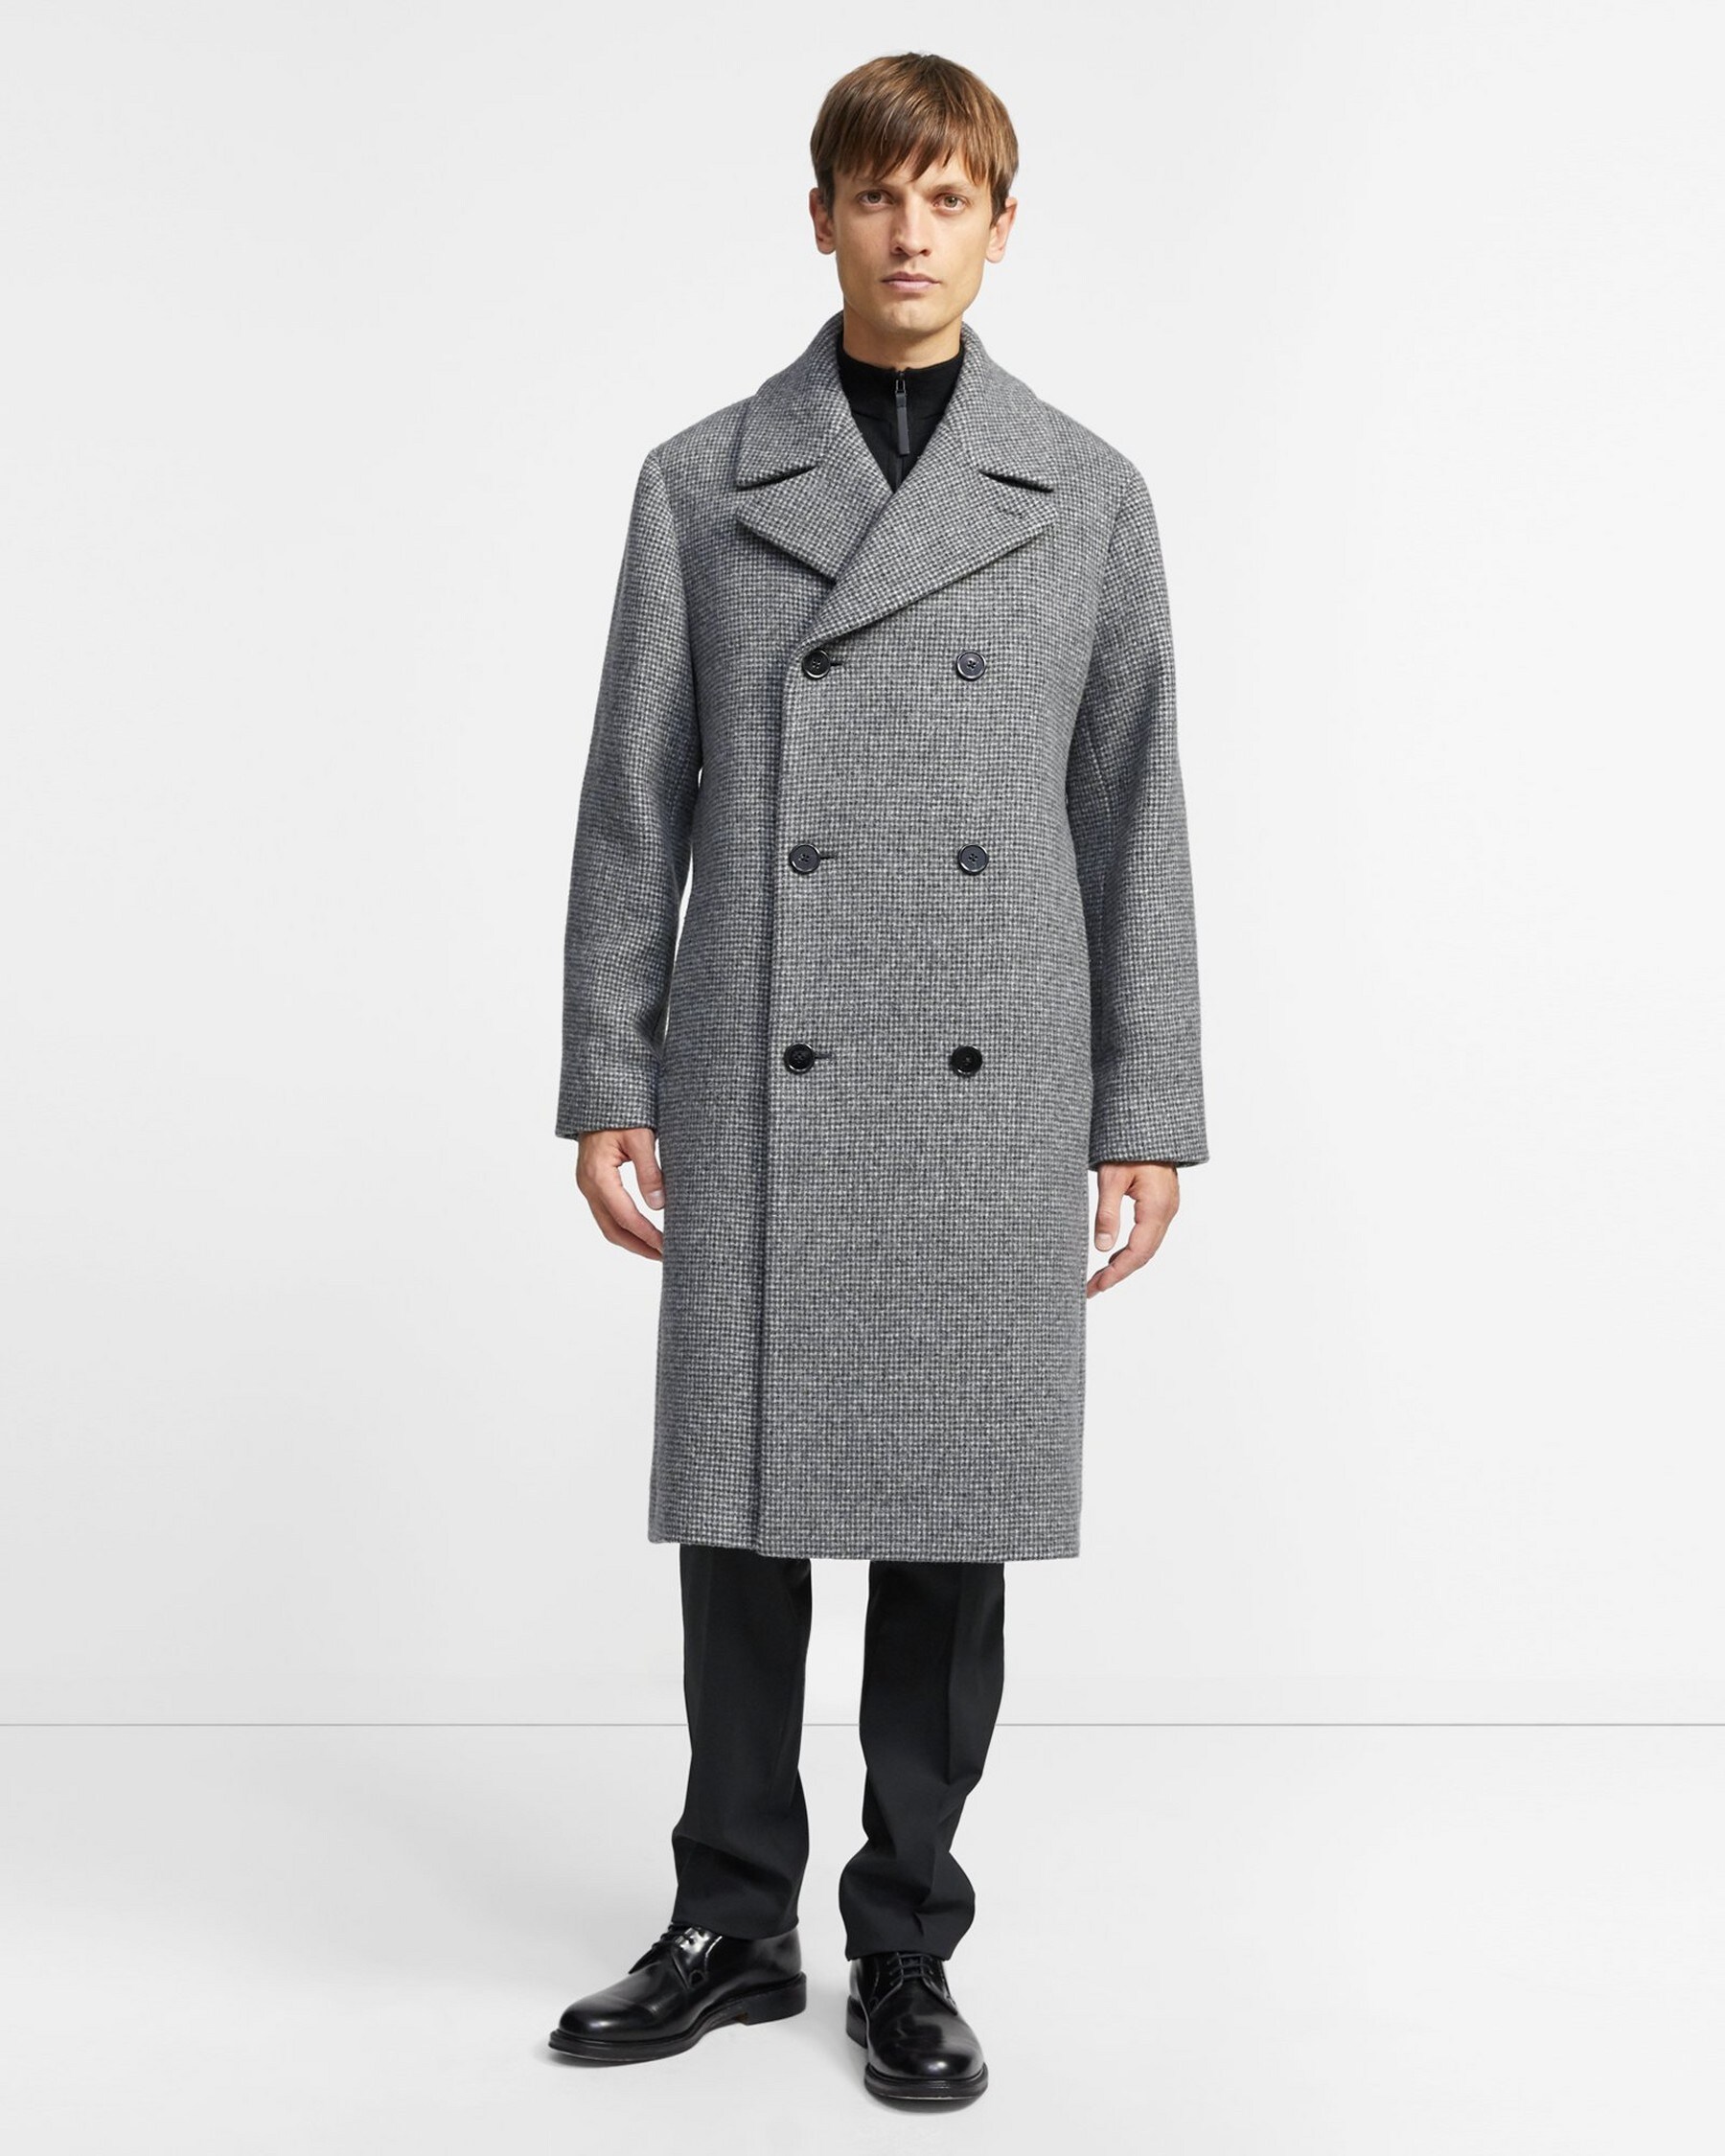 Dalston Coat in Wool-Cashmere | Theory